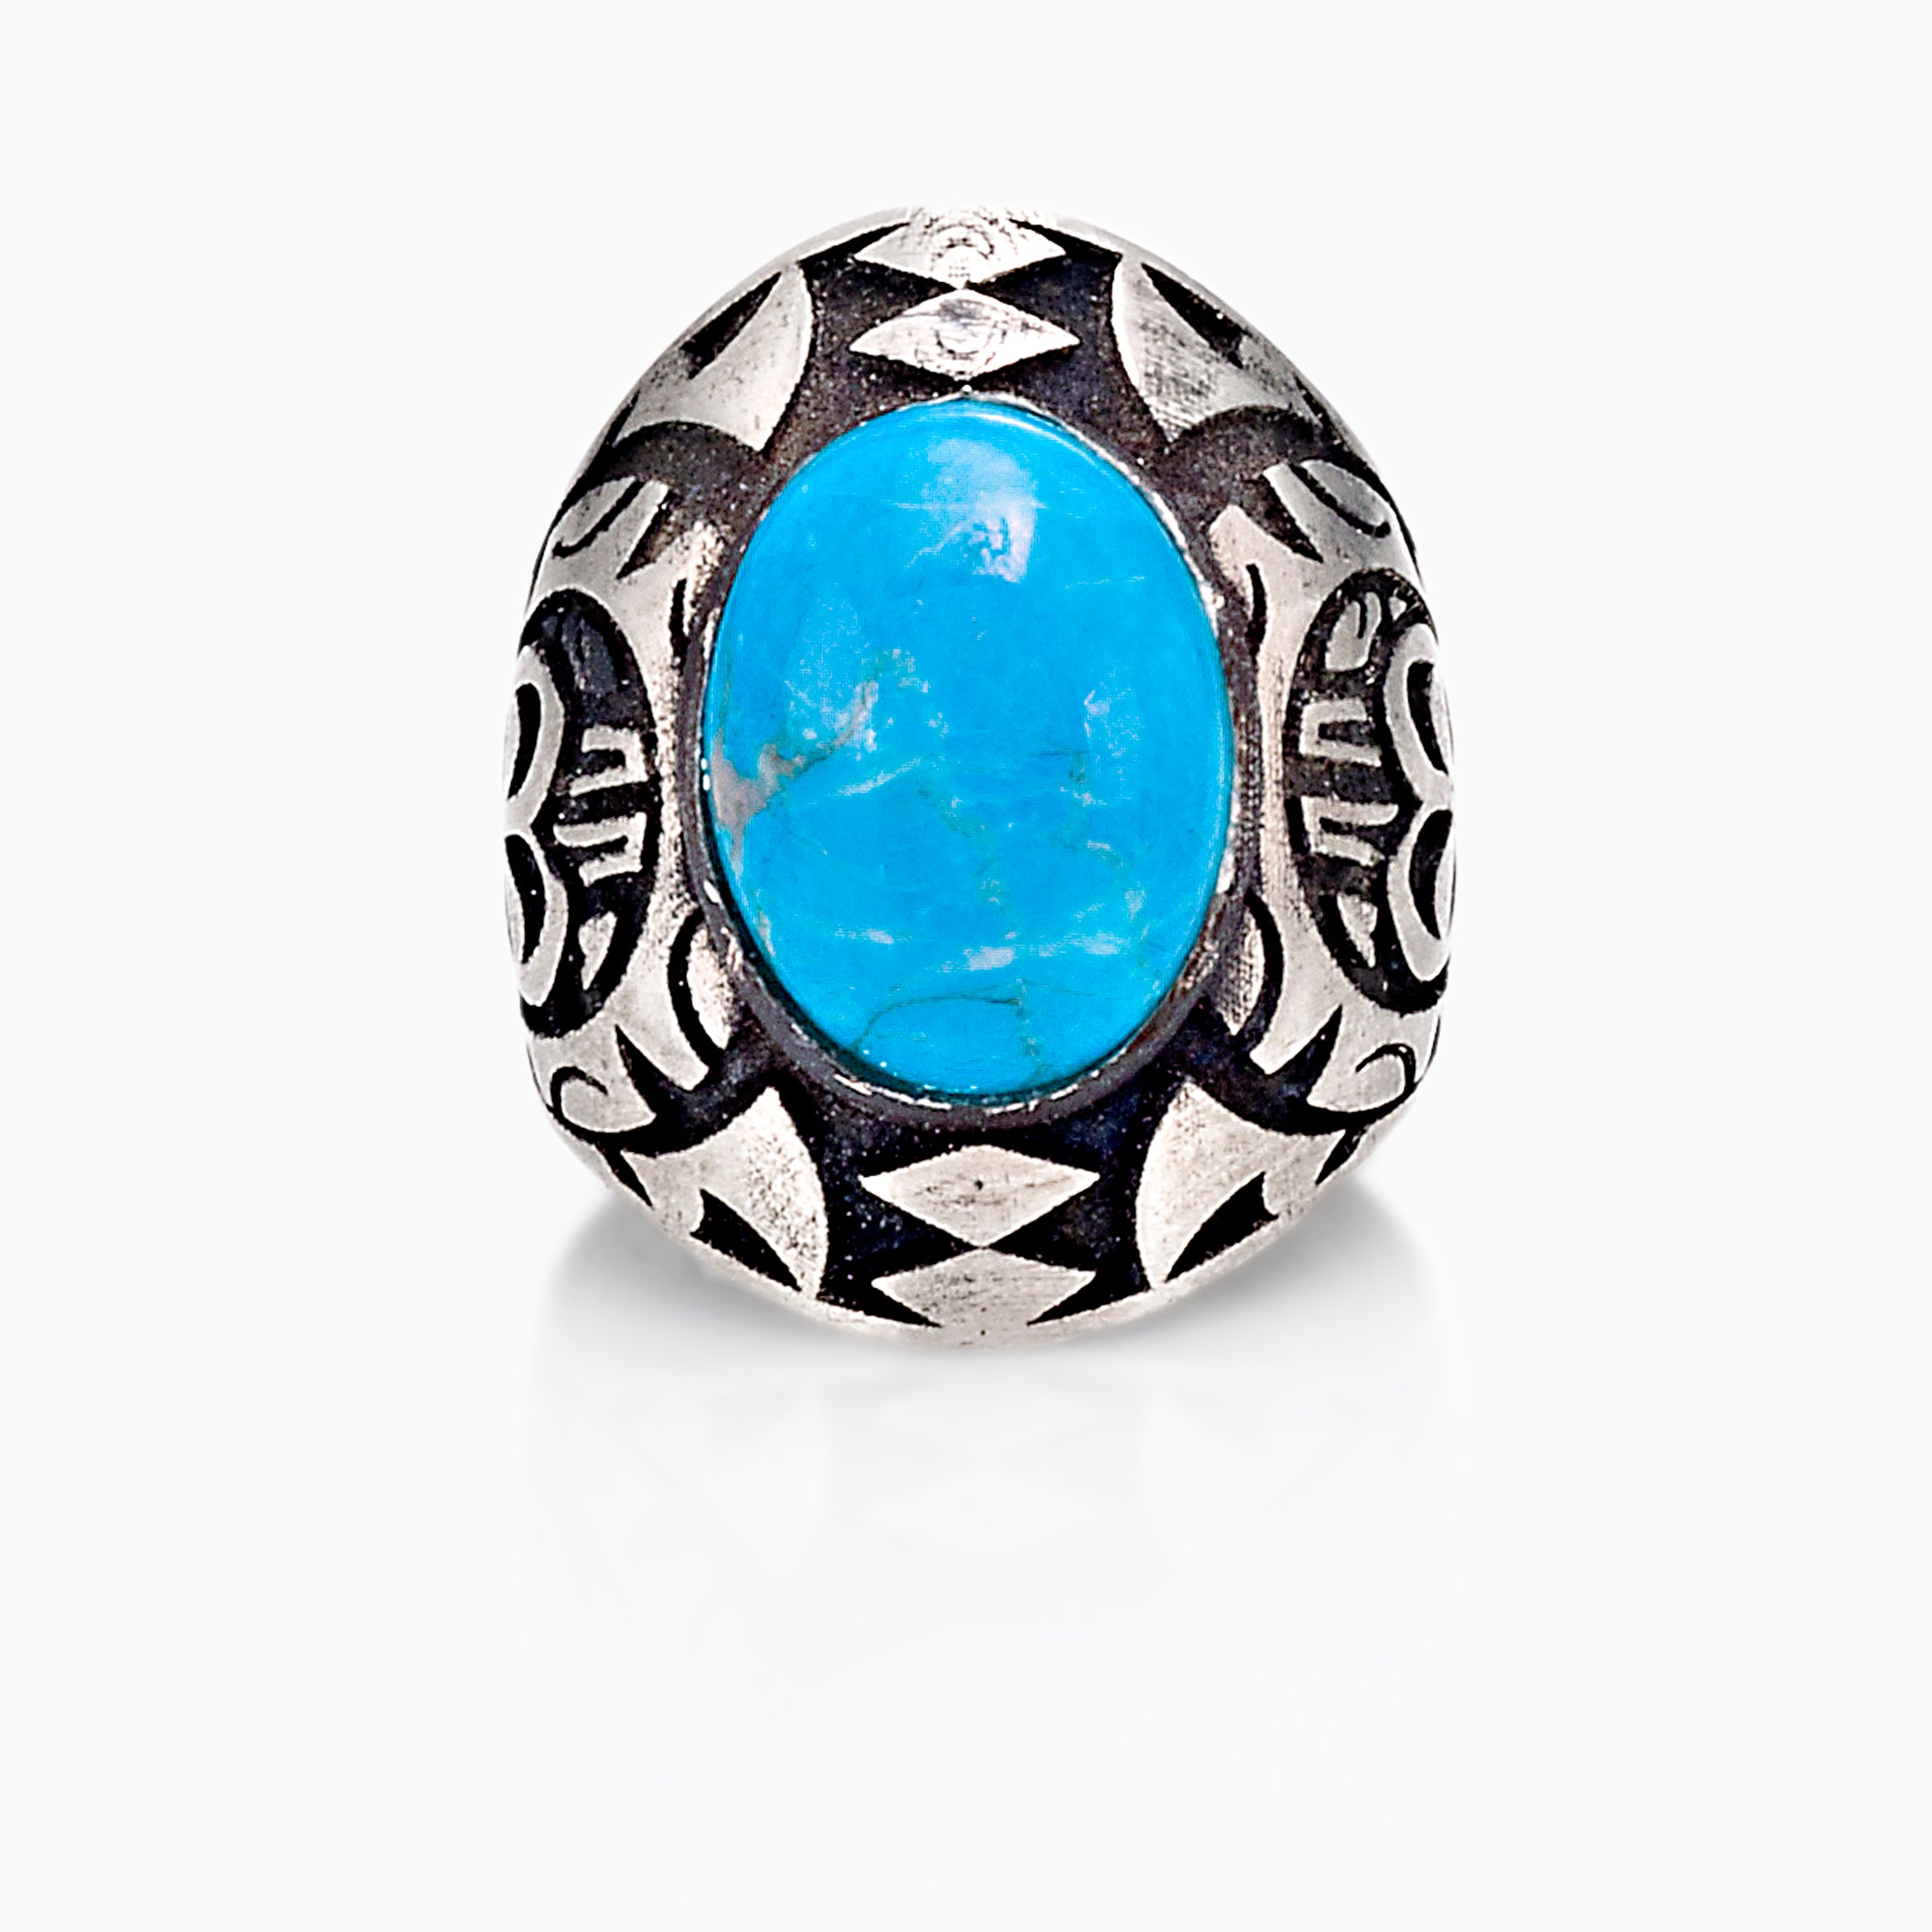 If your man is a little more daring,  you might consider a ring with a gemstone. It could be fun to shop for the male version of the cocktail ring, whether for daily wear or just for a special occasion. NOVICA carries a wide variety of men’s jewelry especially rings with stones: tiger’s eye, onyx, turquoise, they are all so pretty, yet masculine.